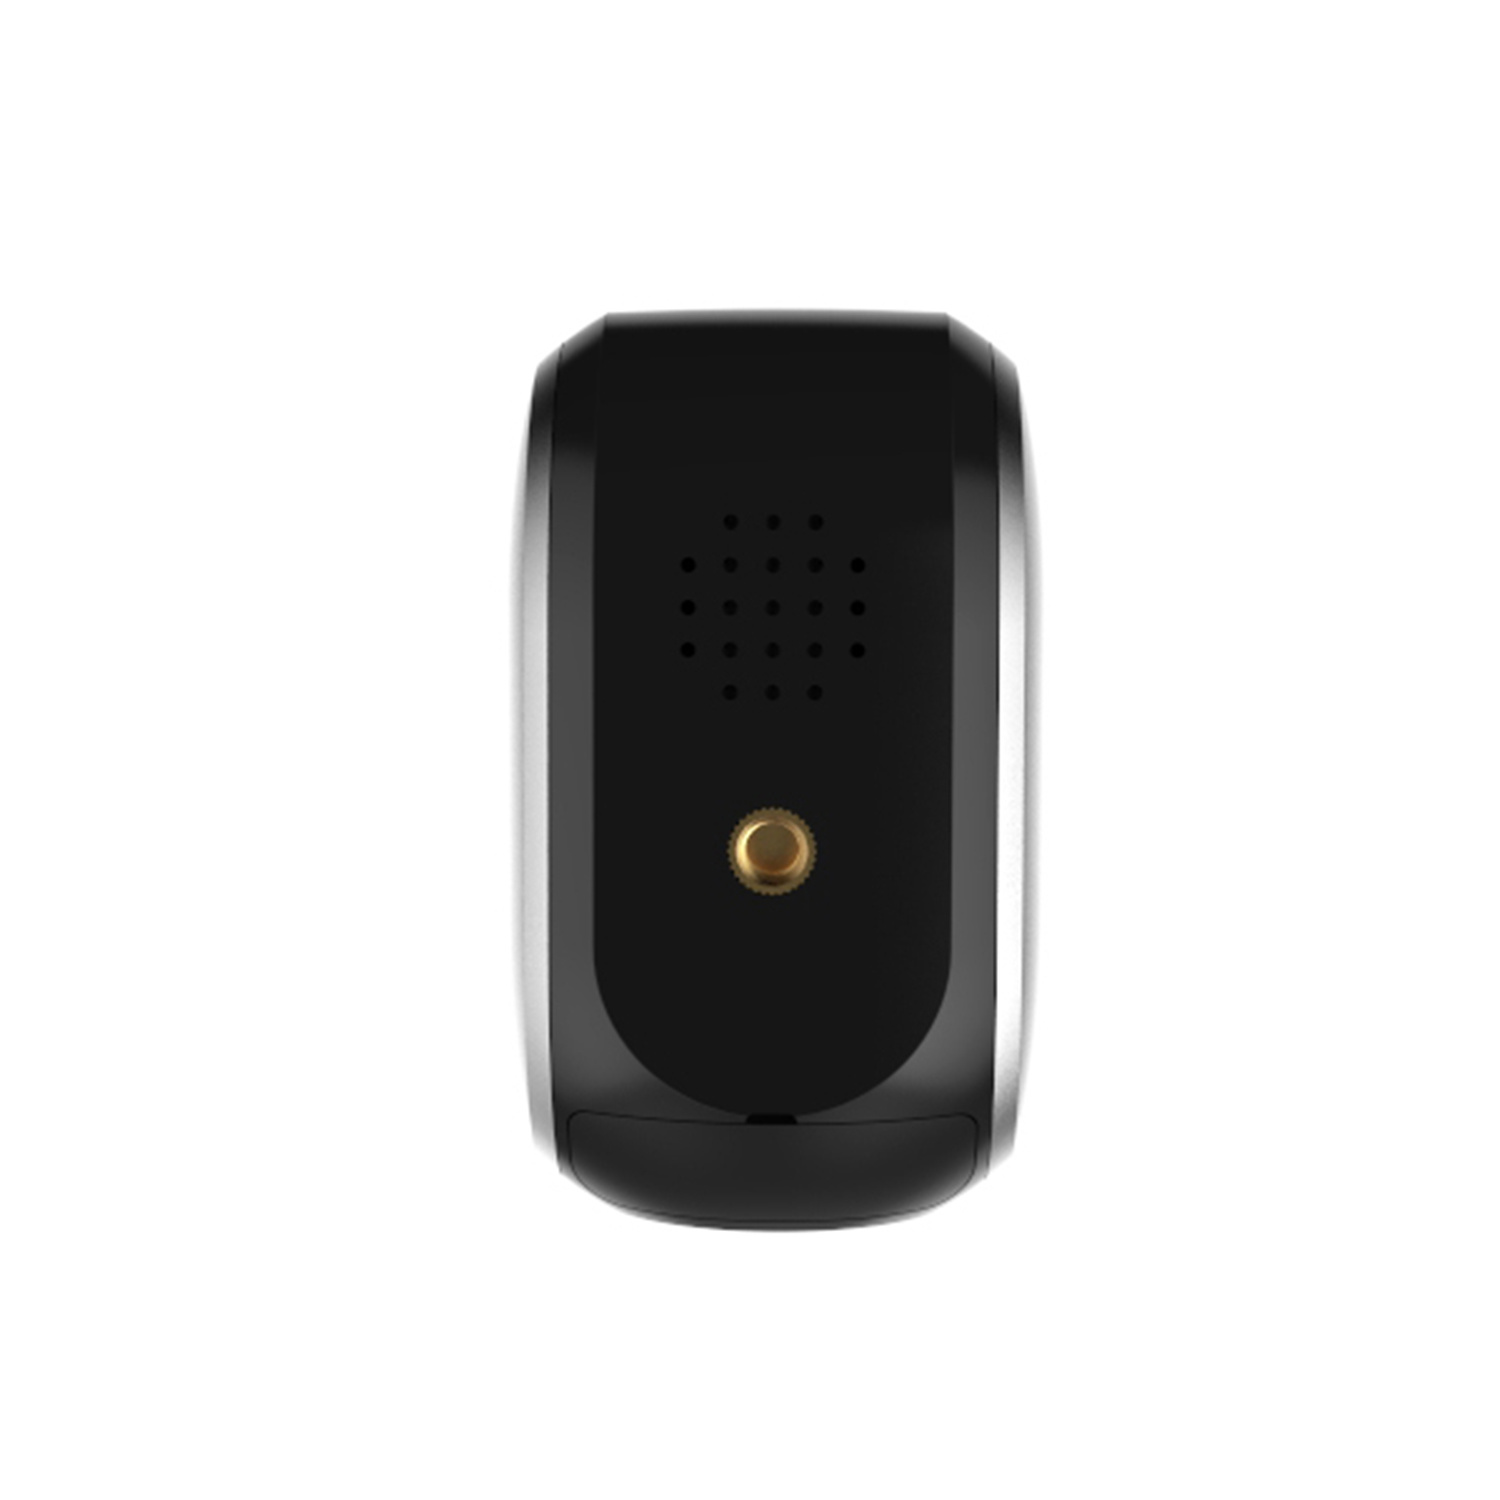 Hankvision 2K Battery Camera Work for Tuya Smart Wi-Fi with PIR Sensor Low Power Consumption Wireless Connection